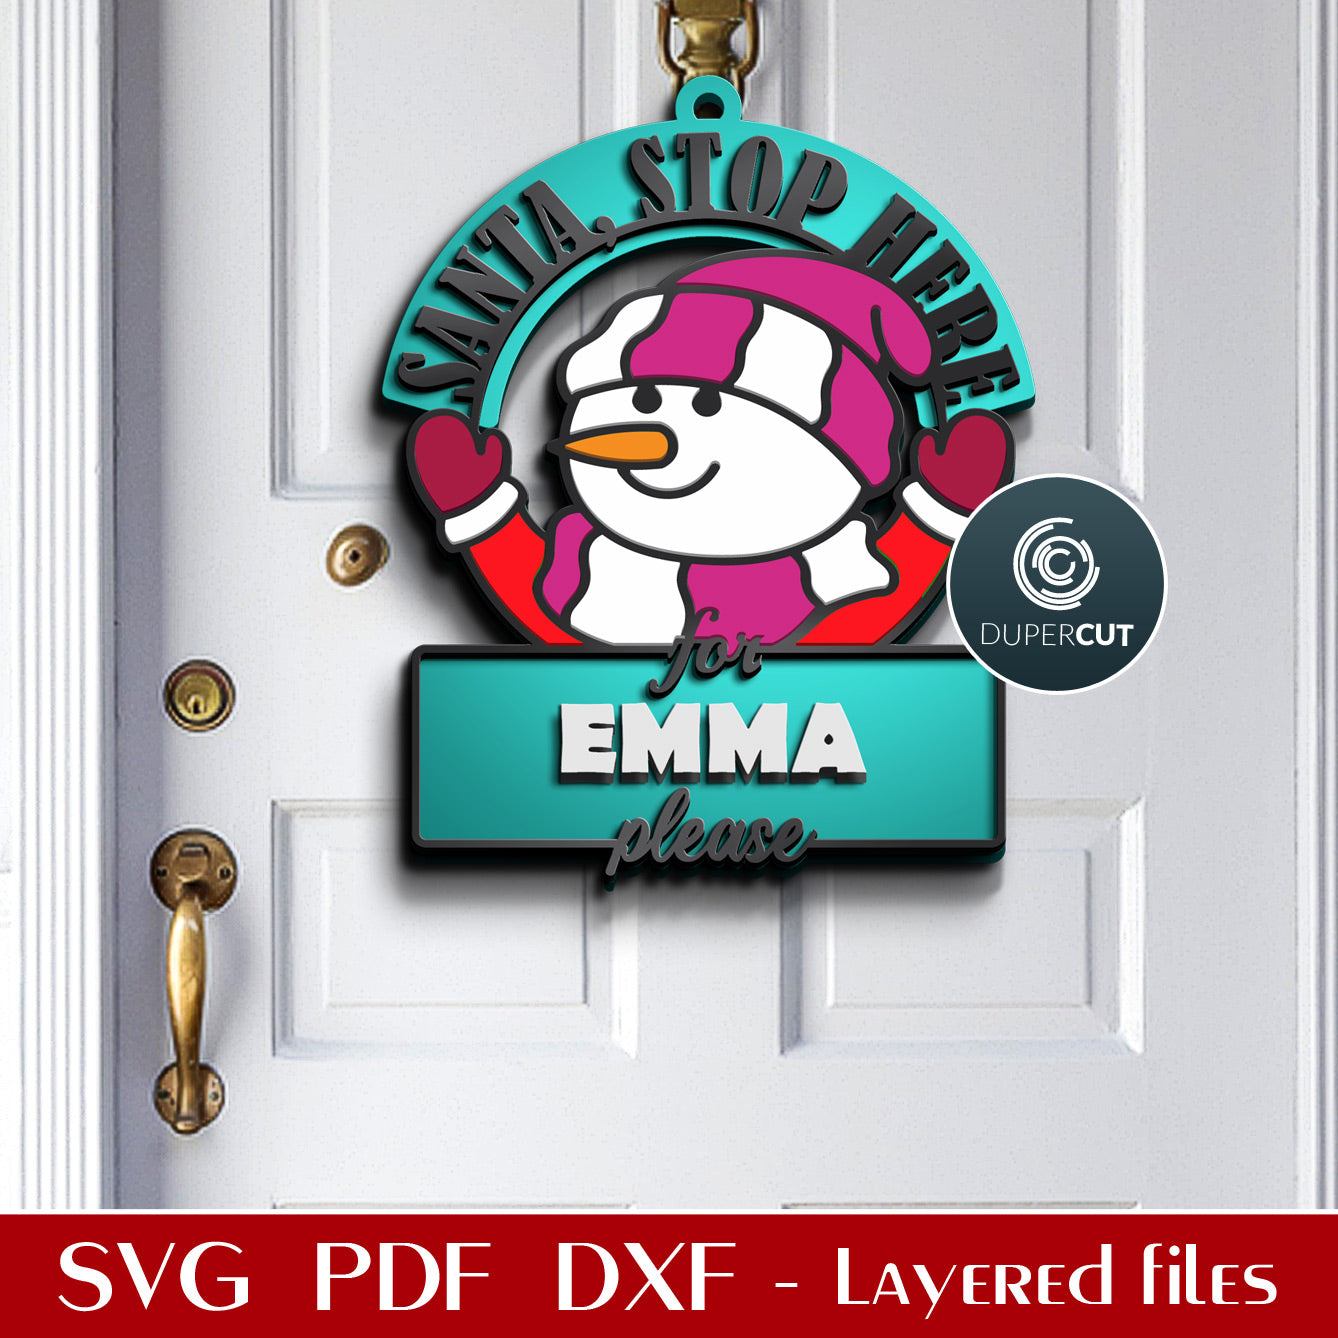 Santa, please stop here, Christmas door hanger,  add child's name, SVG DXF vector layered cutting files for Glowforge, Cricut, Silhouette, CNC laser machines by DuperCut